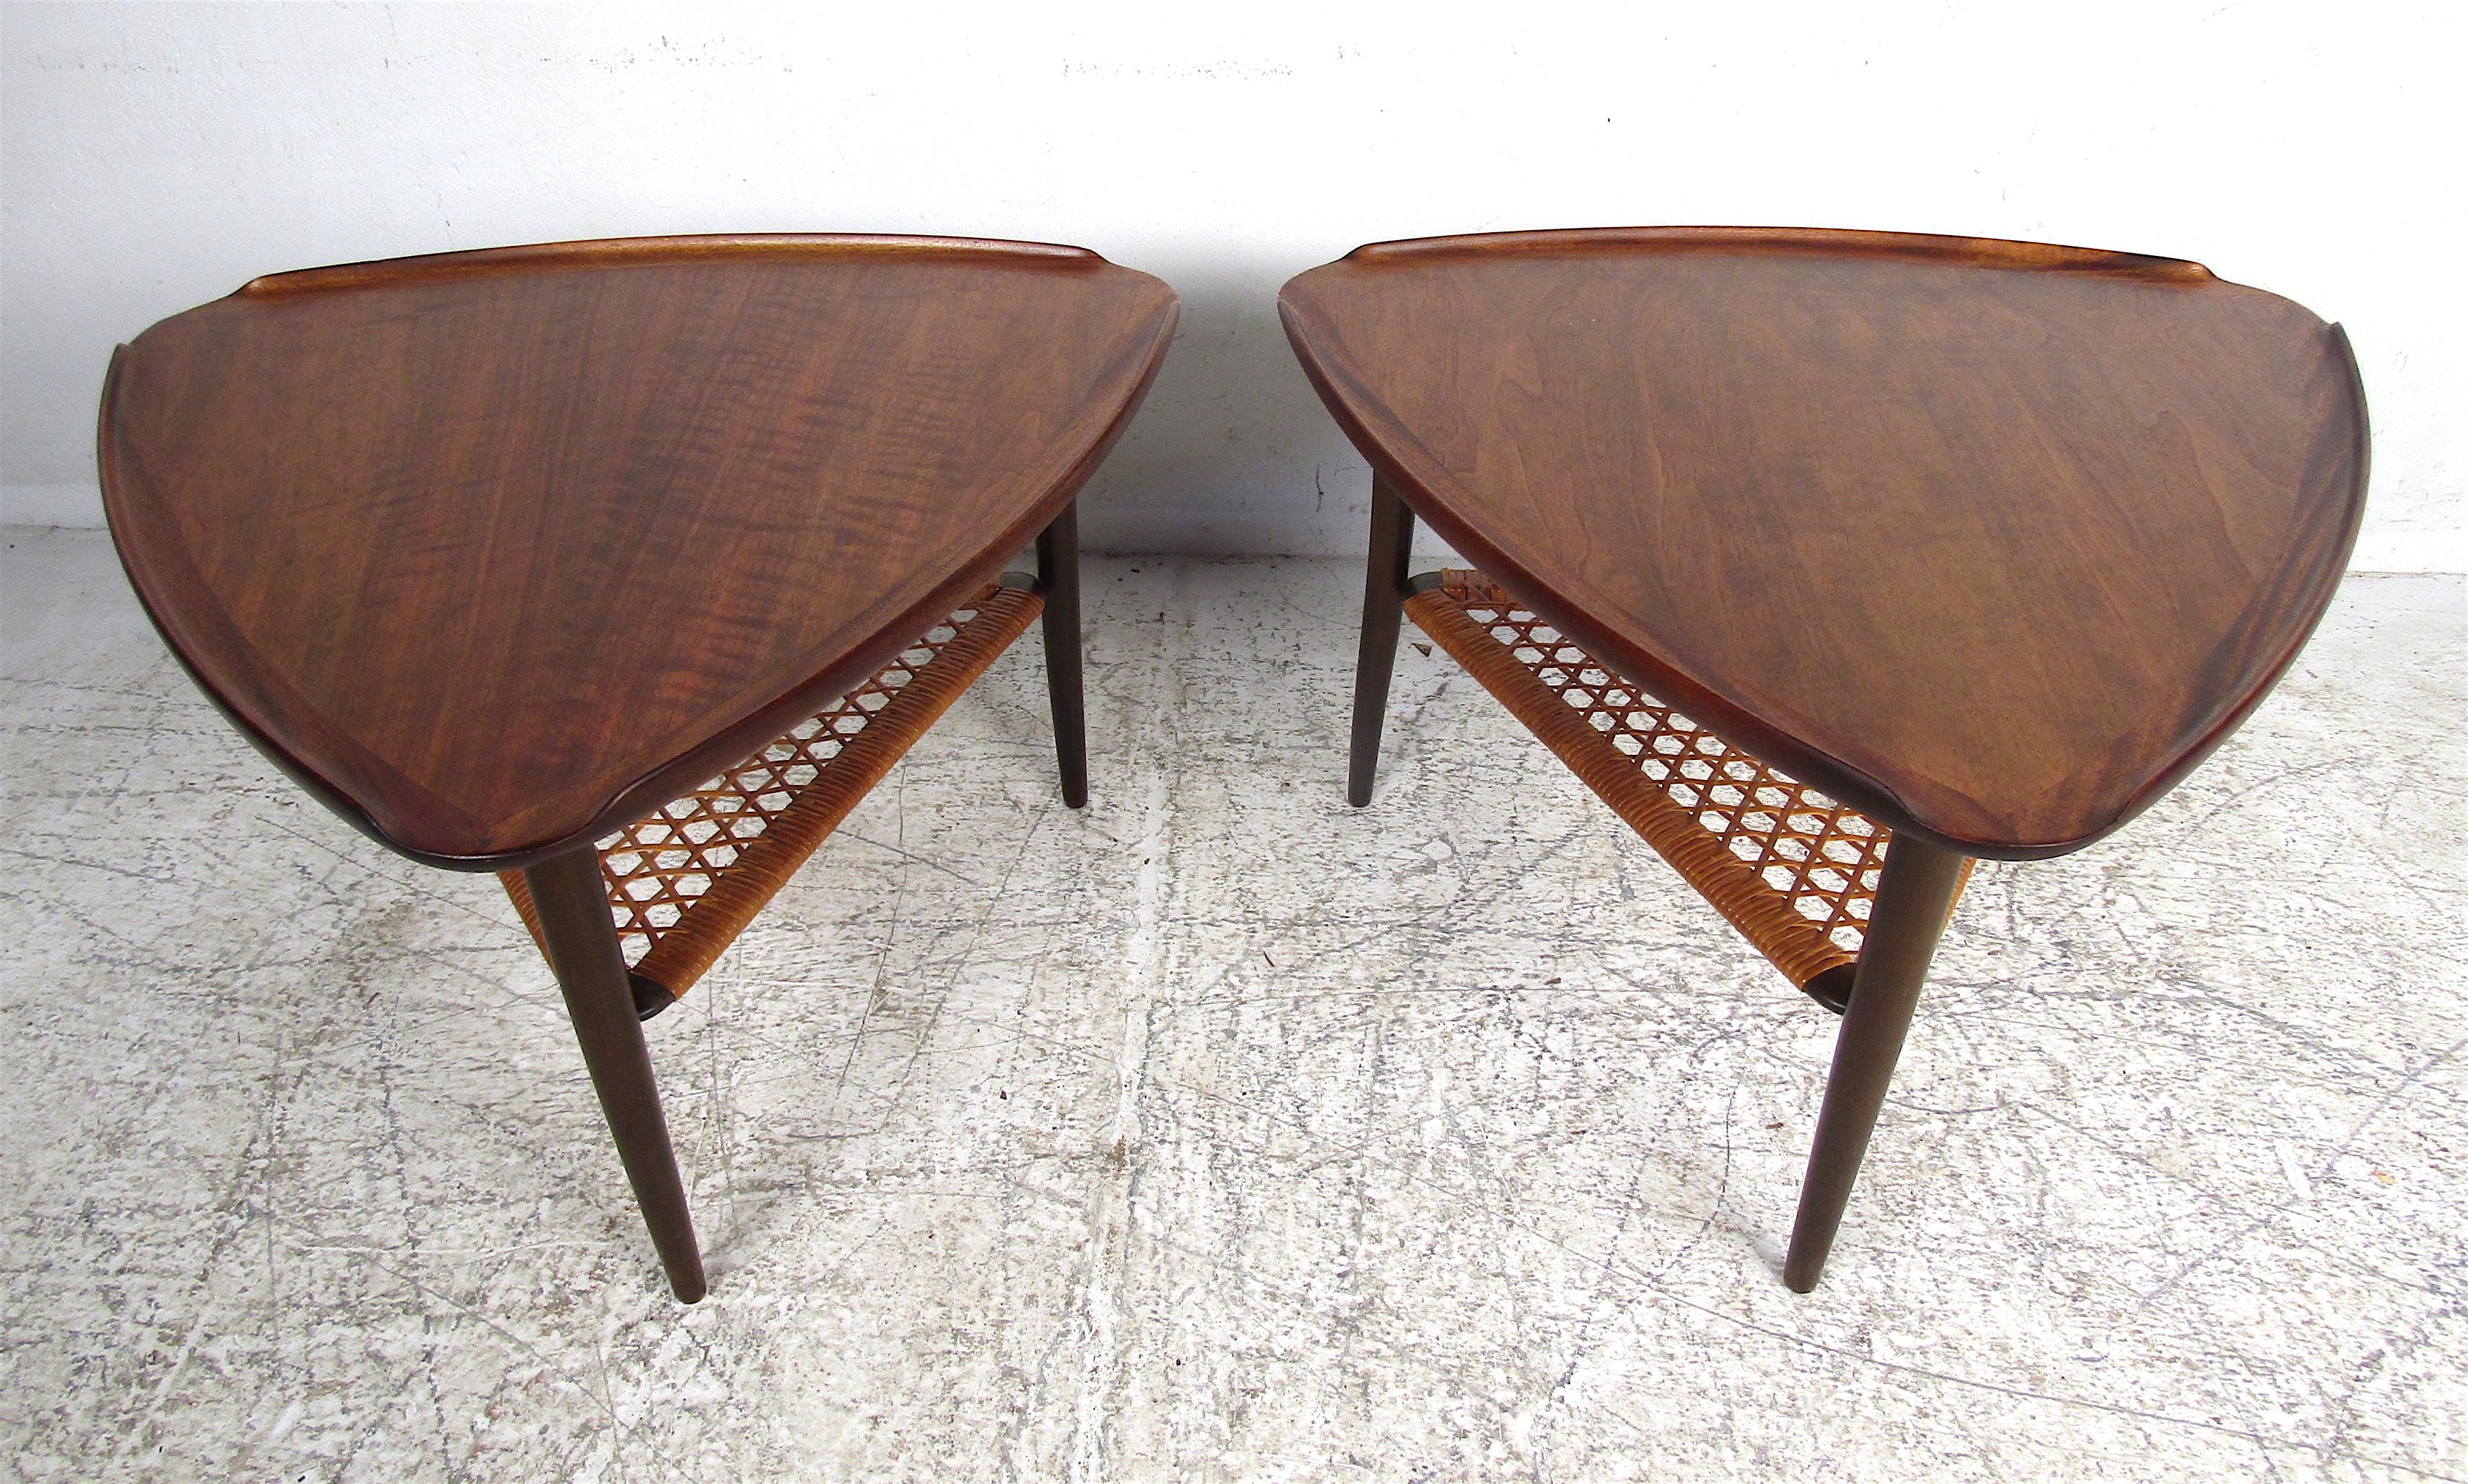 This stunning pair of Mid-Century Modern end tables boast a lovely rosewood grain throughout and a lower-tier made of woven cane. A sleek design that boasts raised edges and long tapered legs adding to the Danish modern appeal. One of a kind tripod